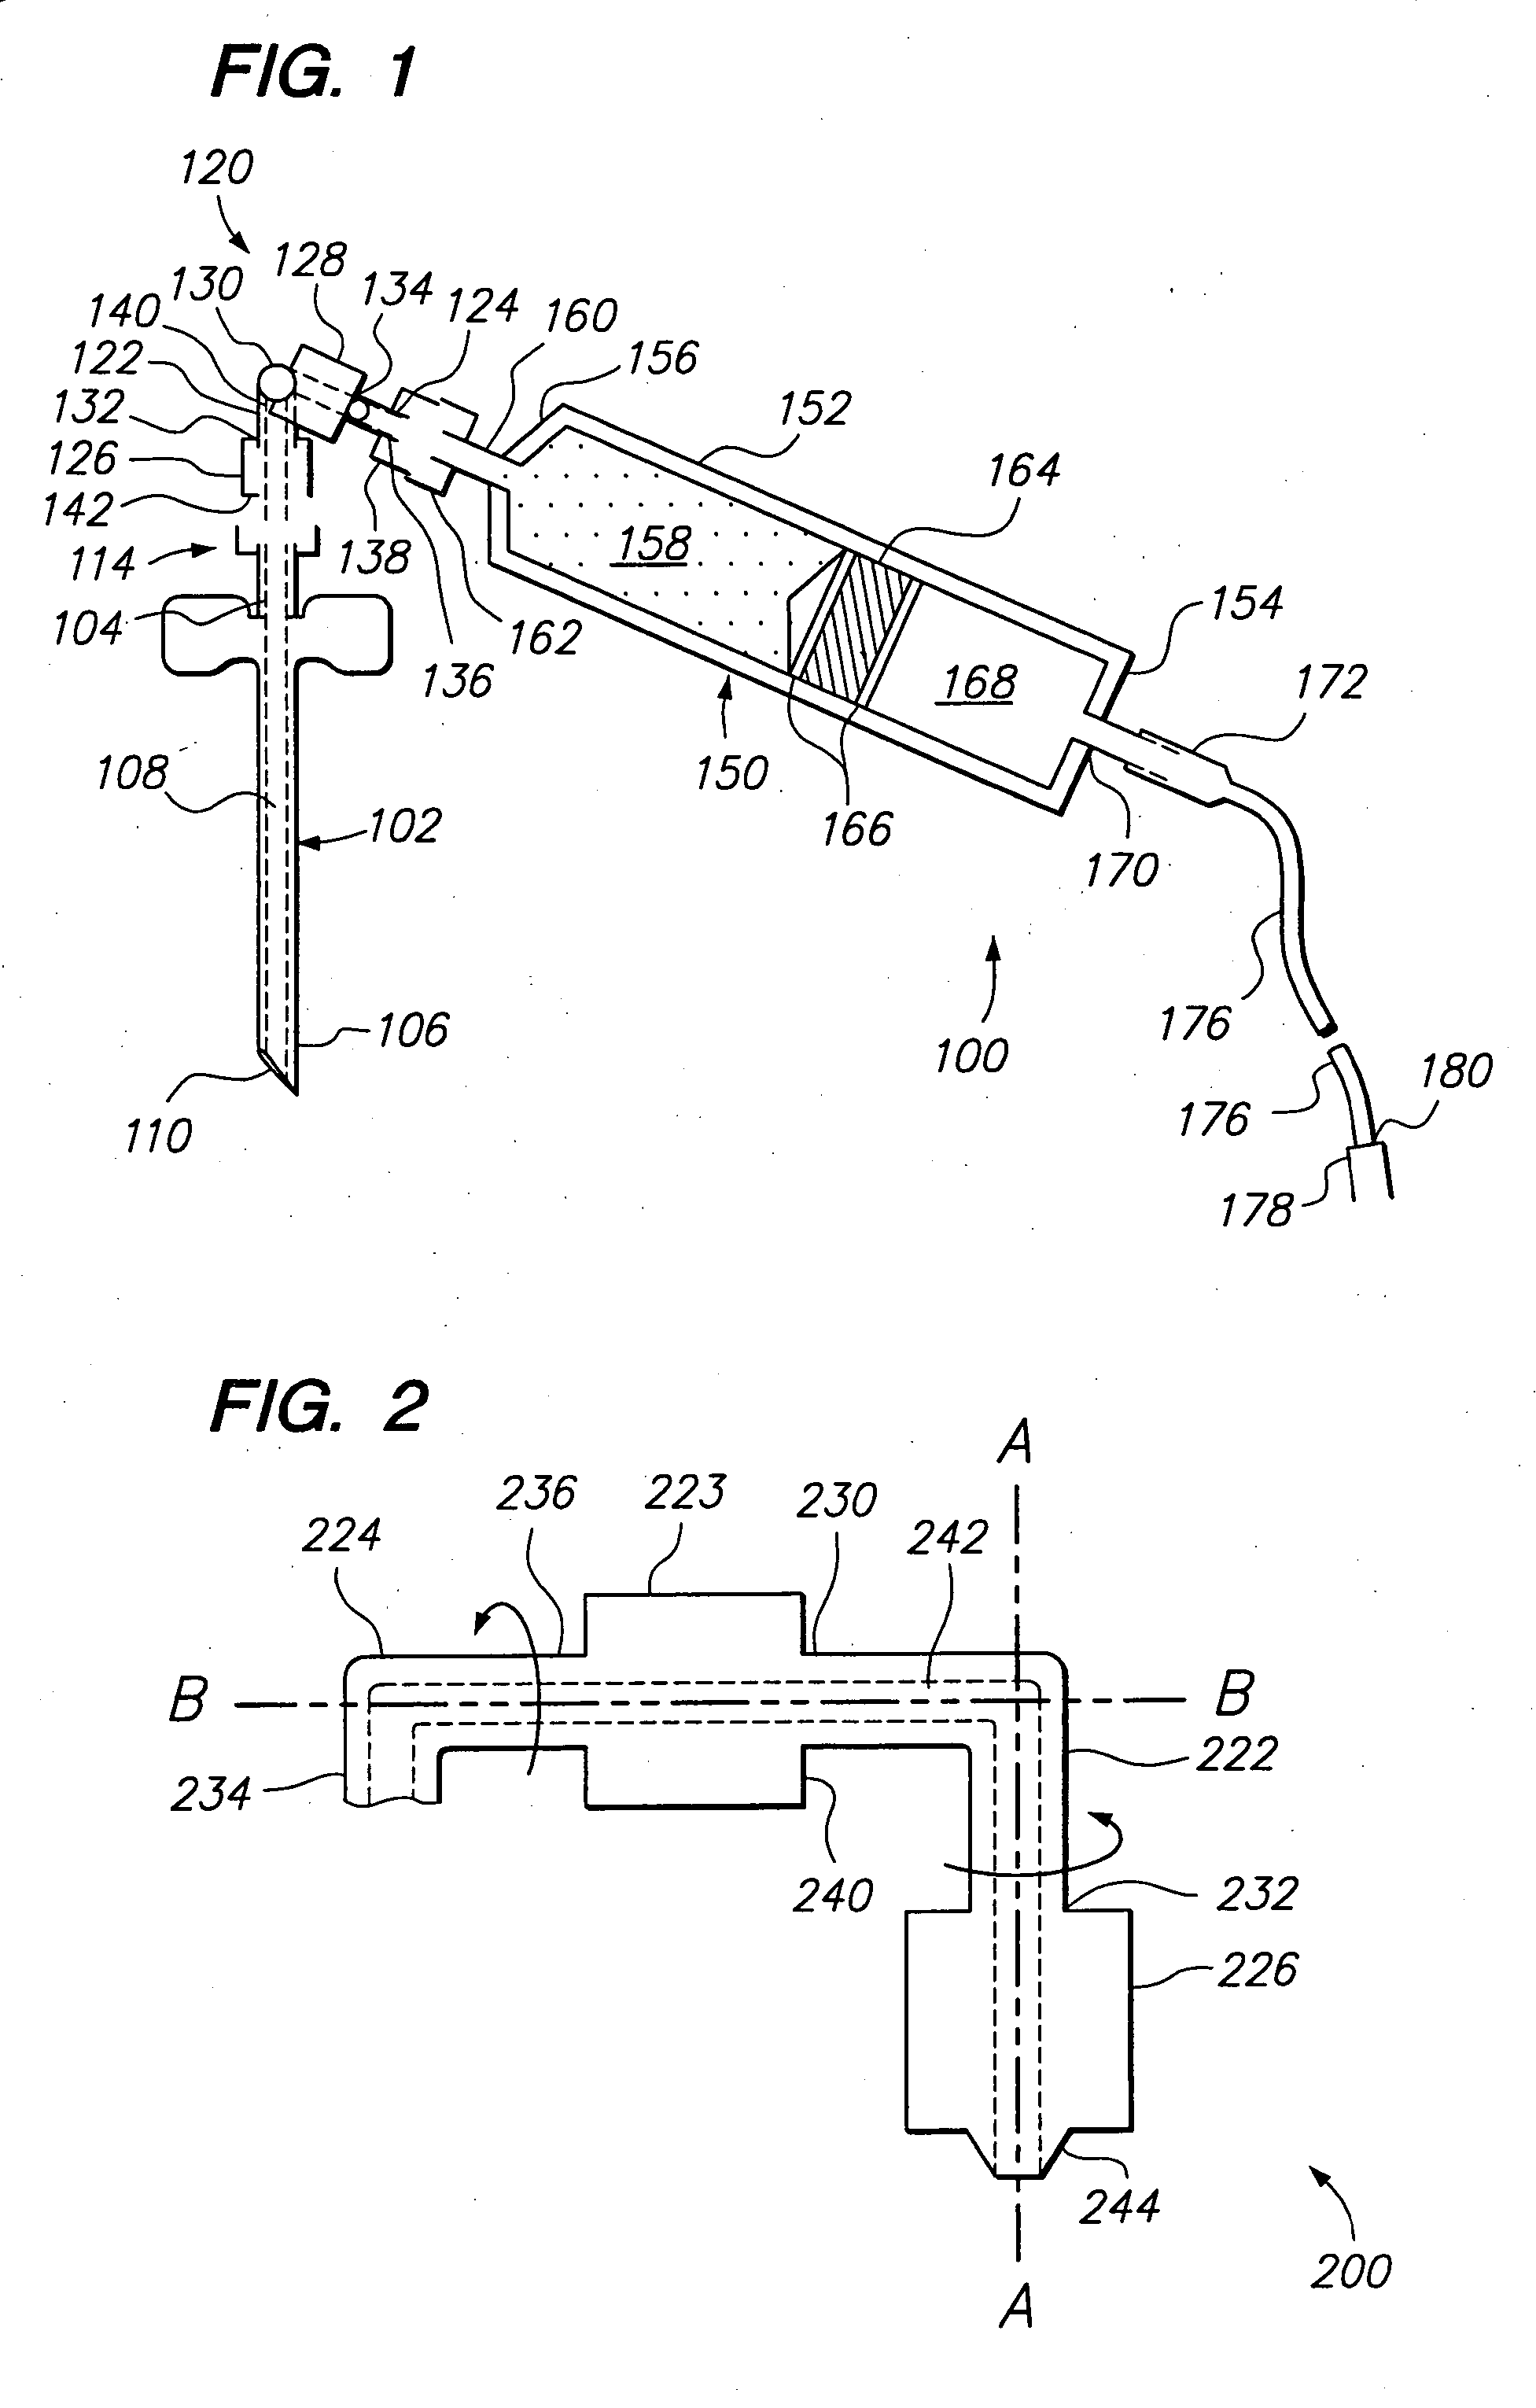 Apparatus and methods for delivering compounds into vertebrae for vertebroplasty